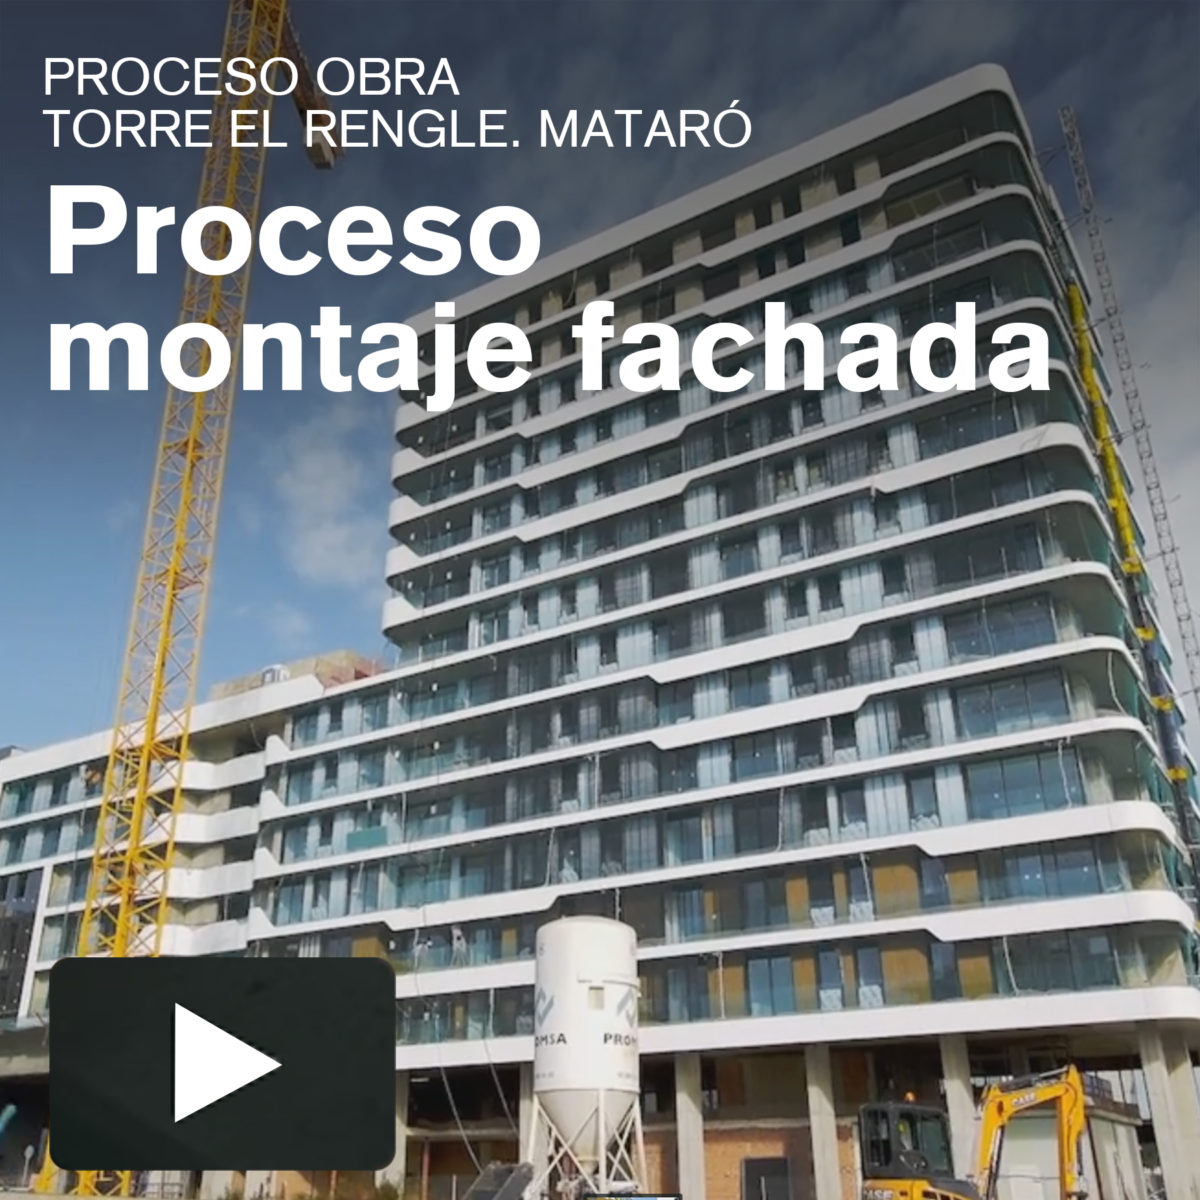 EL RENGLE TOWER CONSTRUCTION PROCESS. ASSEMBLY OF THE FACADE